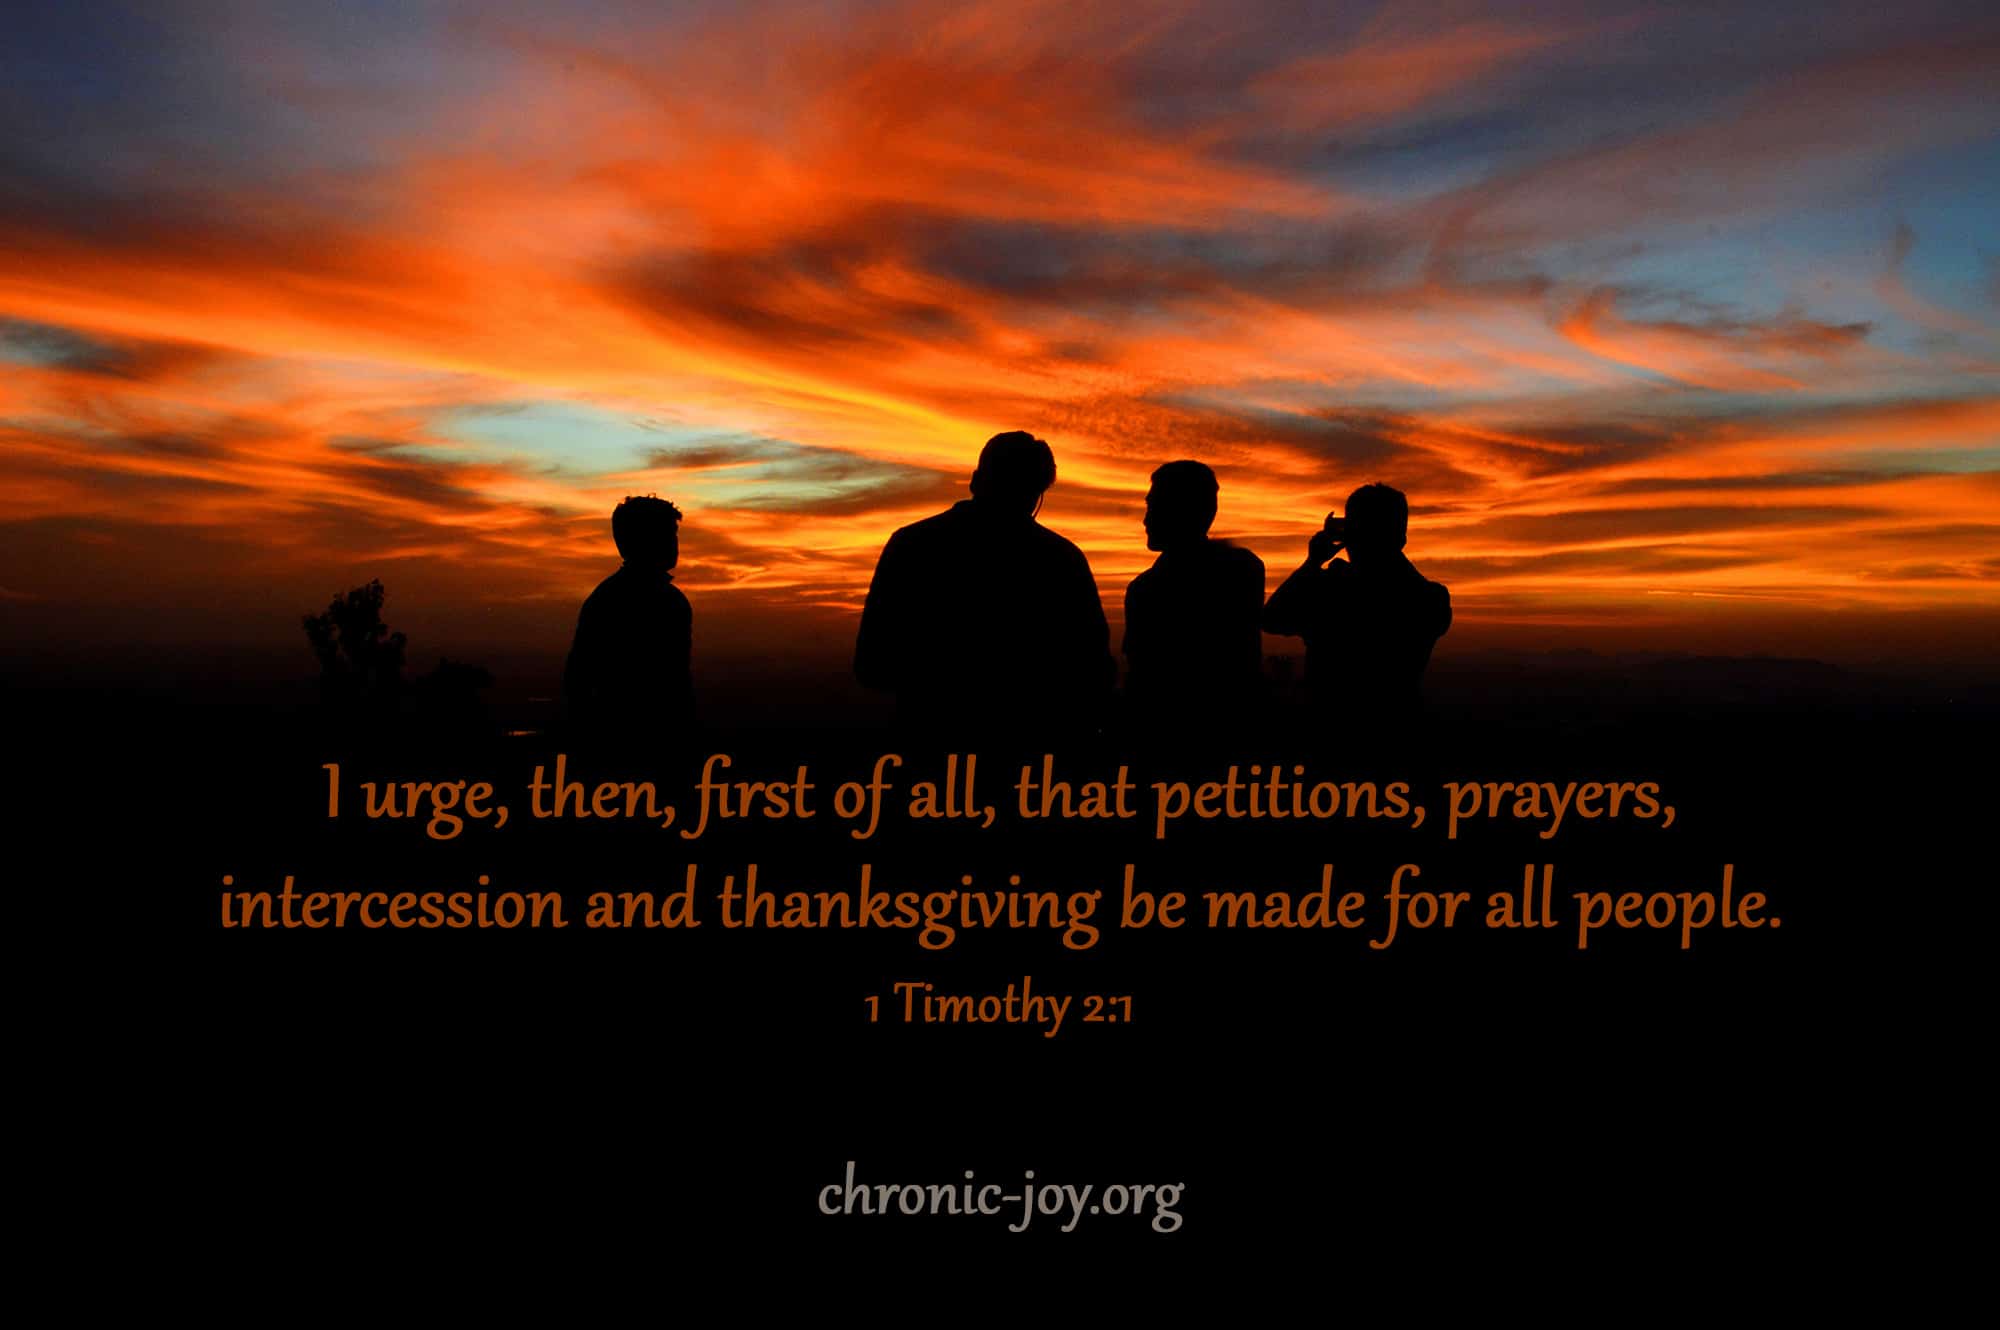 “I urge, then, first of all, that petitions, prayers, intercession and thanksgiving be made for all people” 1 Tim. 2:1